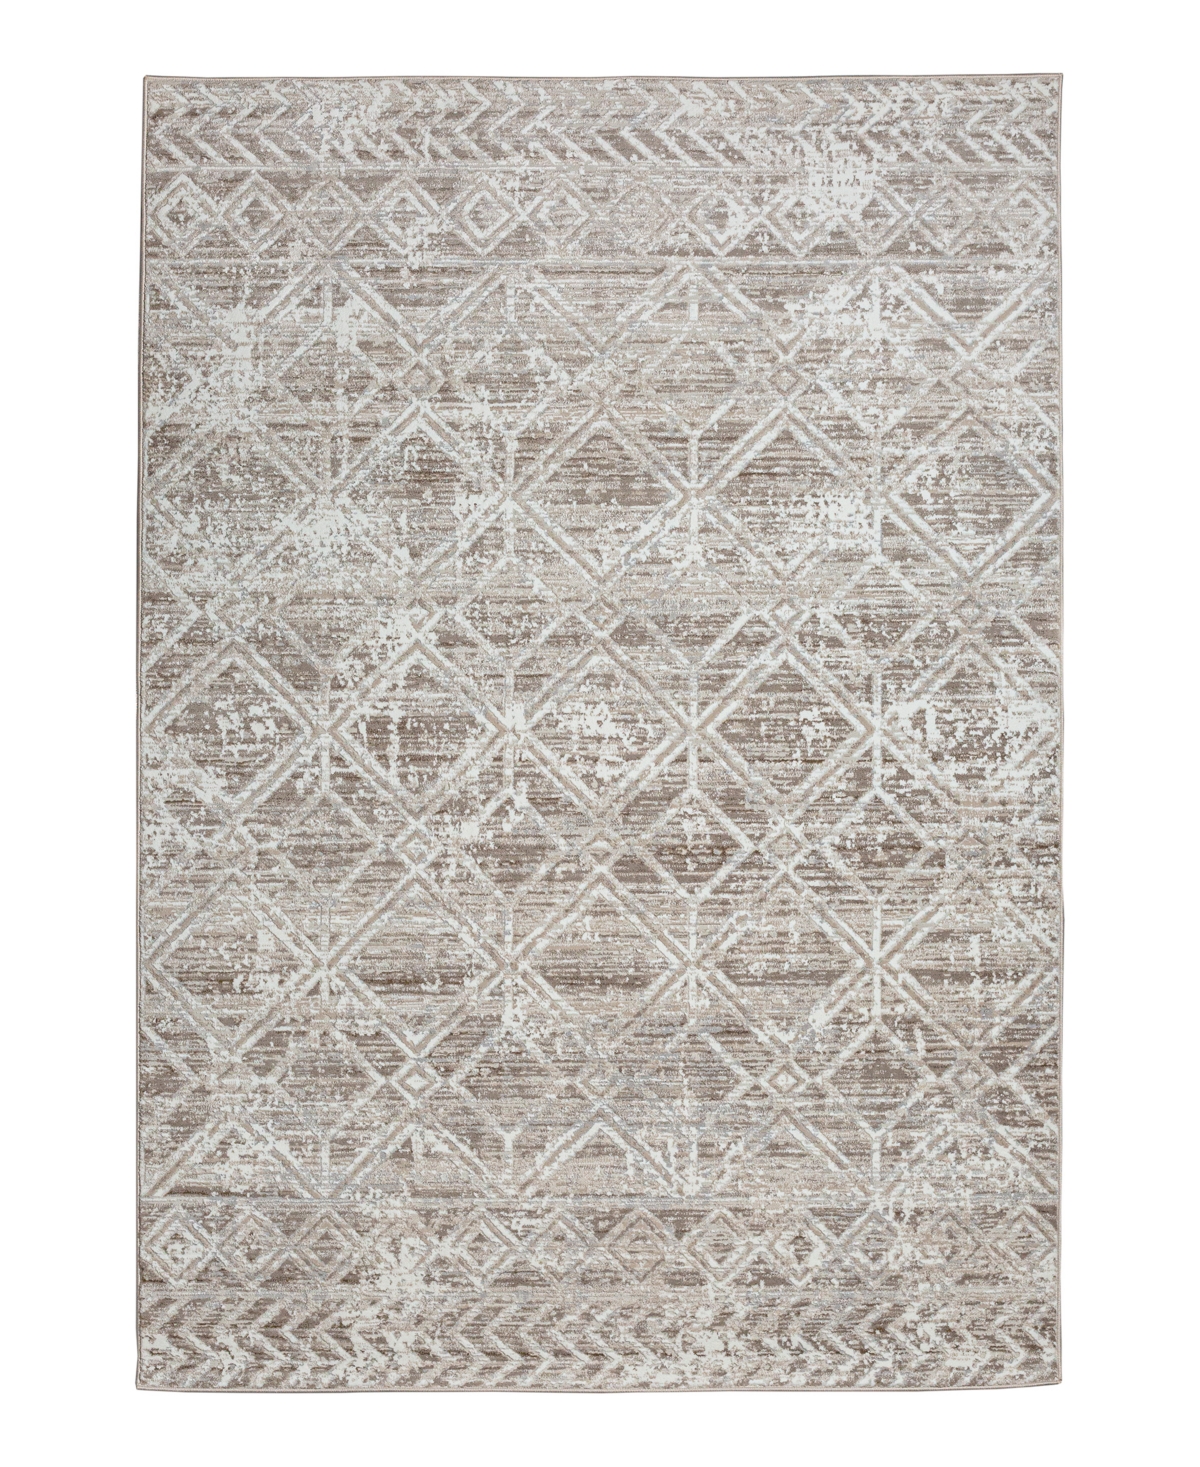 Km Home Teola 1243 7'10in x 10'6in Area Rug - Beige